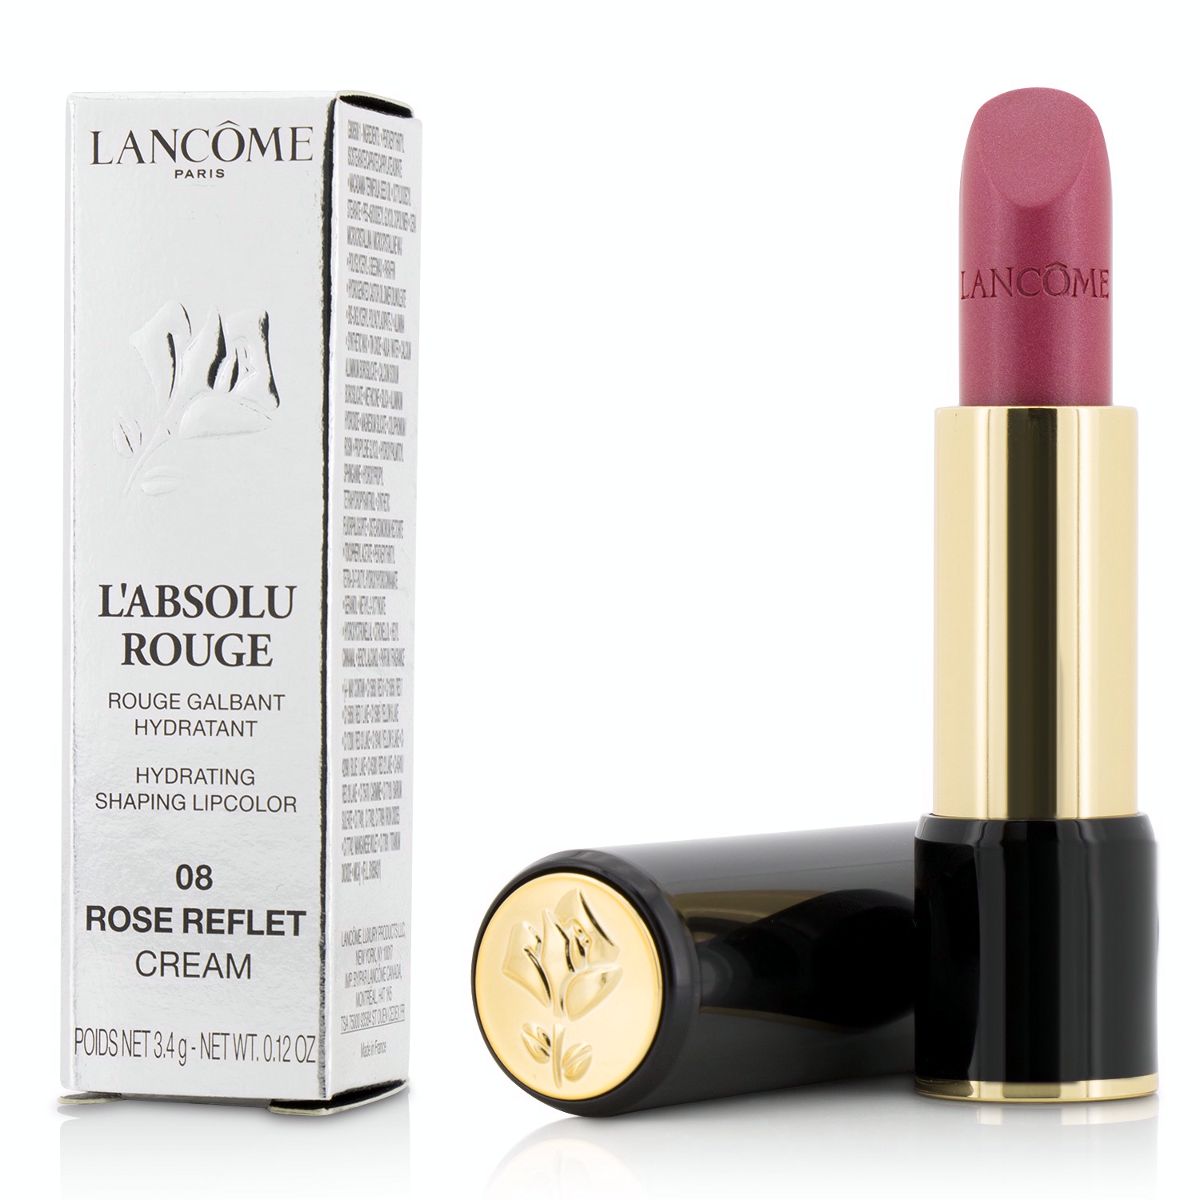 L Absolu Rouge Hydrating Shaping Lipcolor - # 08 Rose Reflet (Cream) Lancome Image